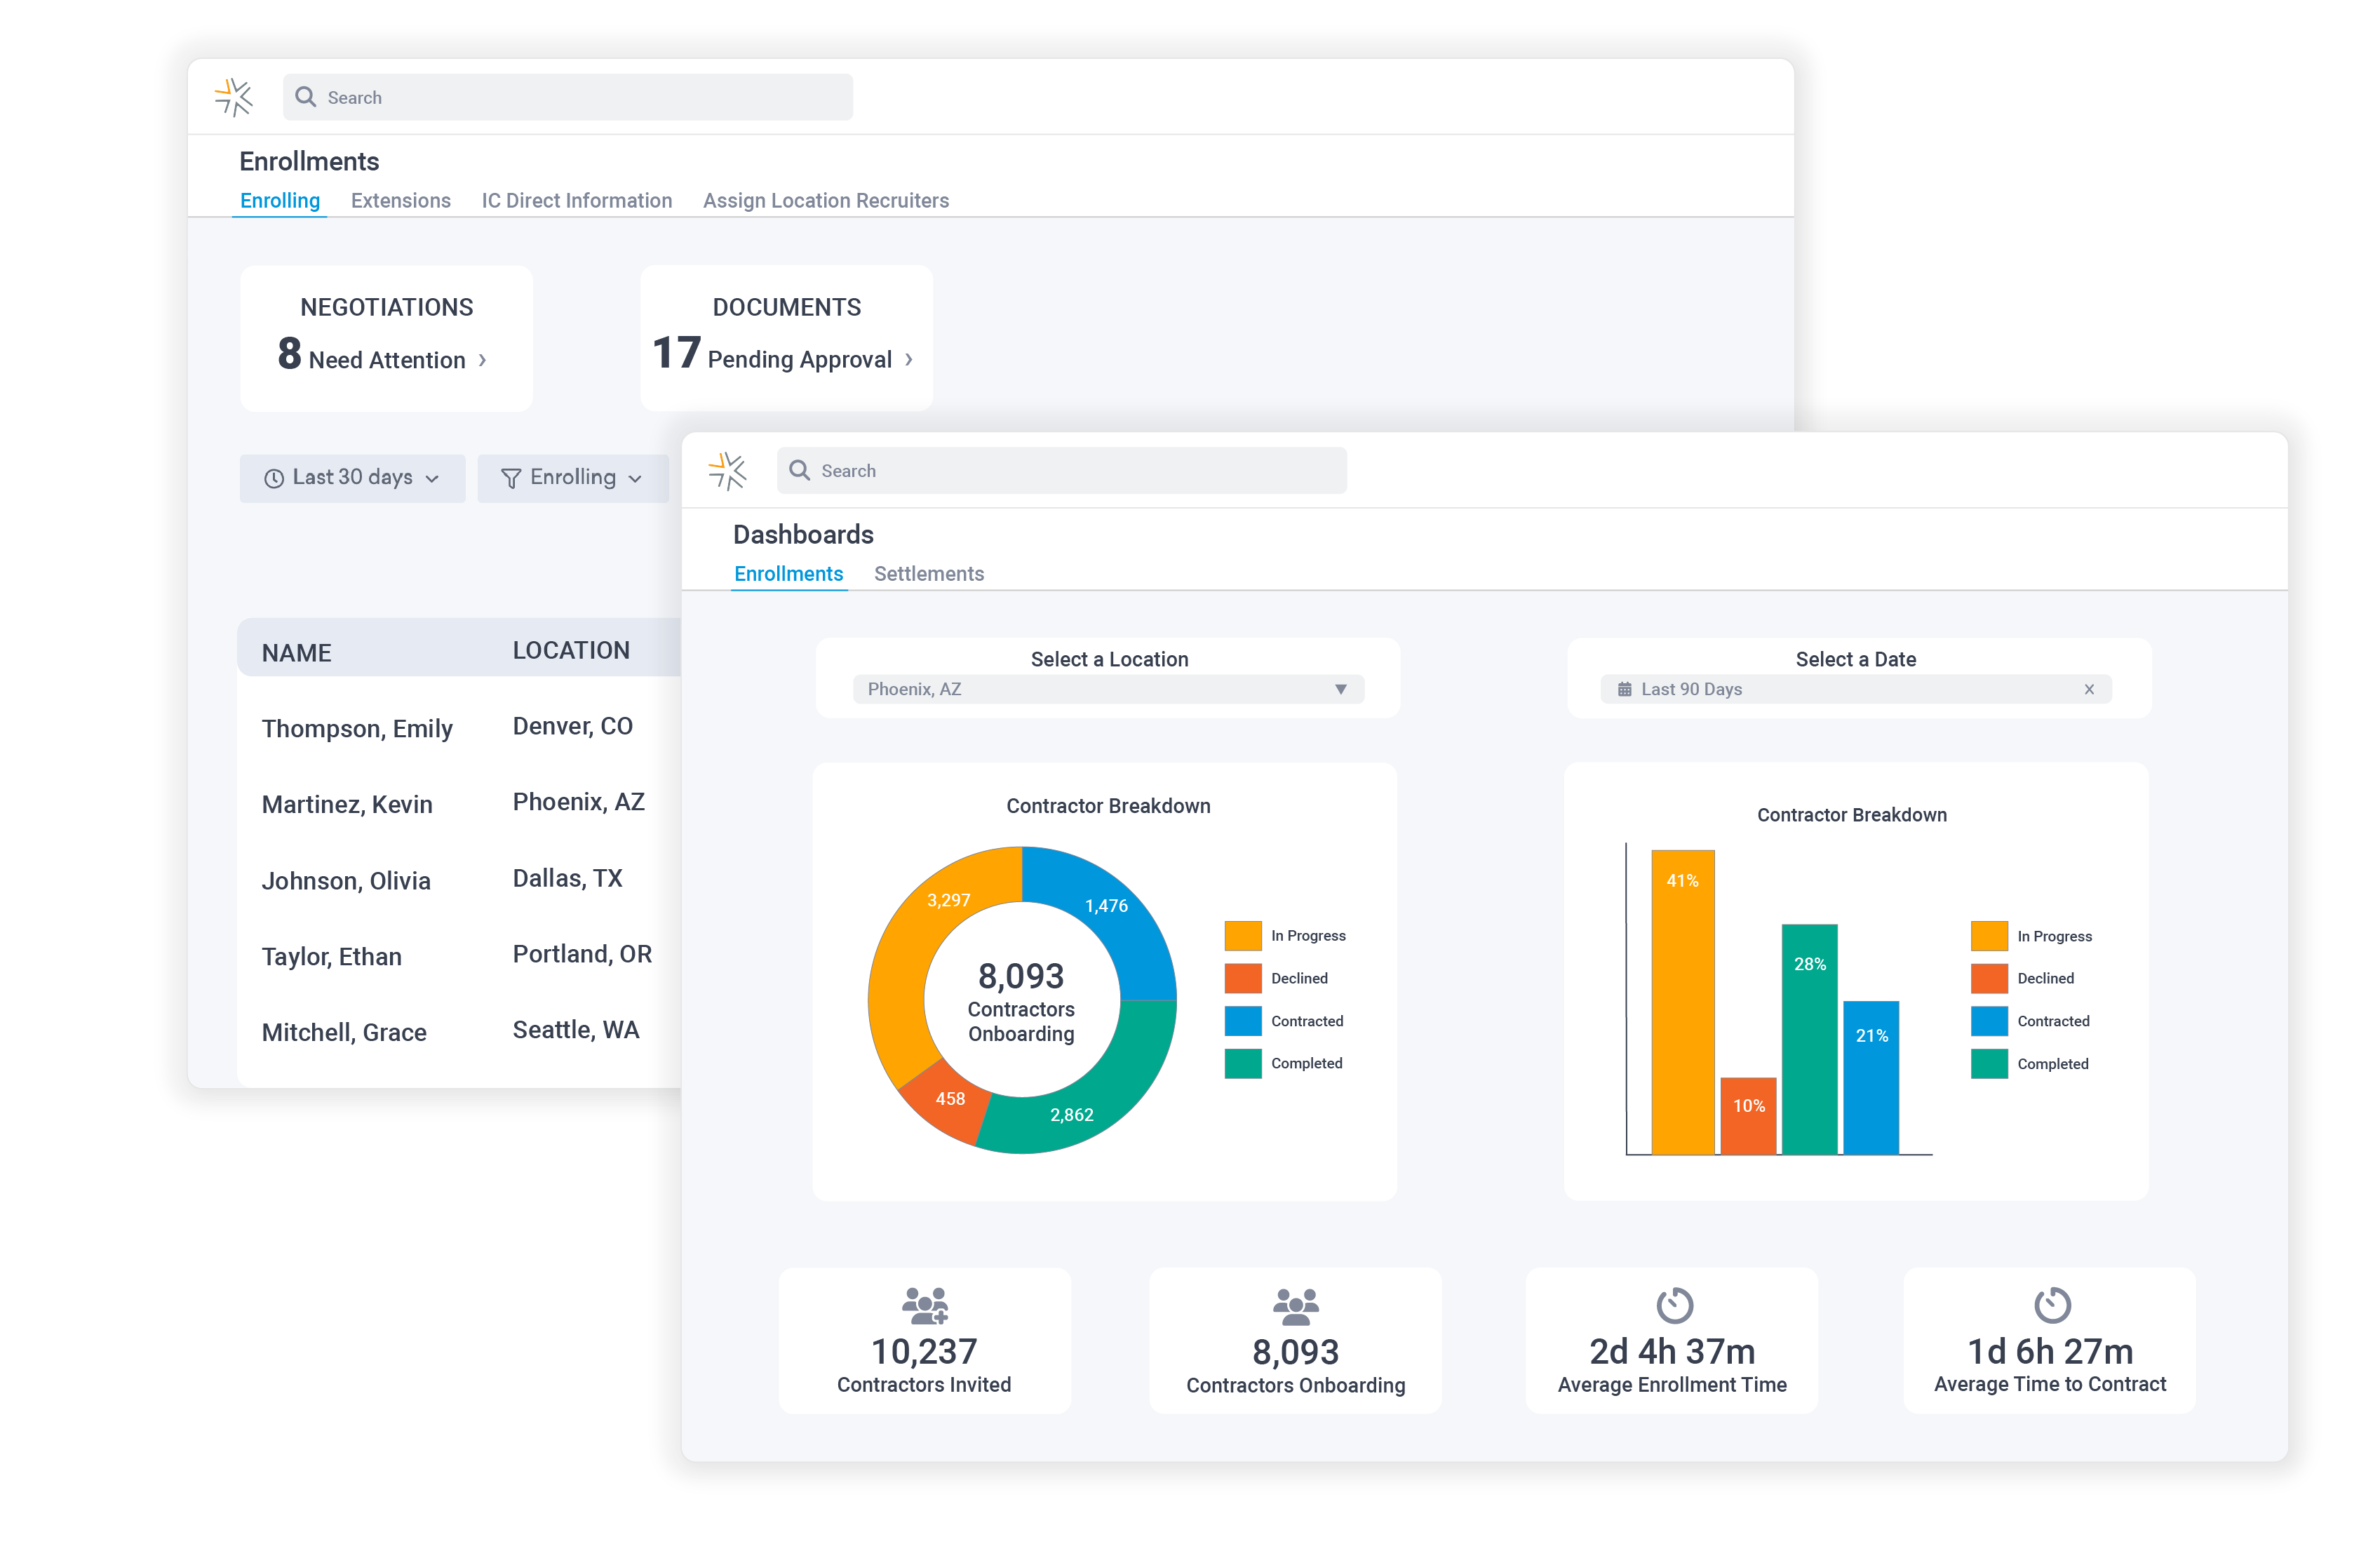 Our mobile-friendly onboarding automates tasks to screen, collect documents, and get contractors to work quickly, while Analytic dashboards put business data insights at your fingertips.